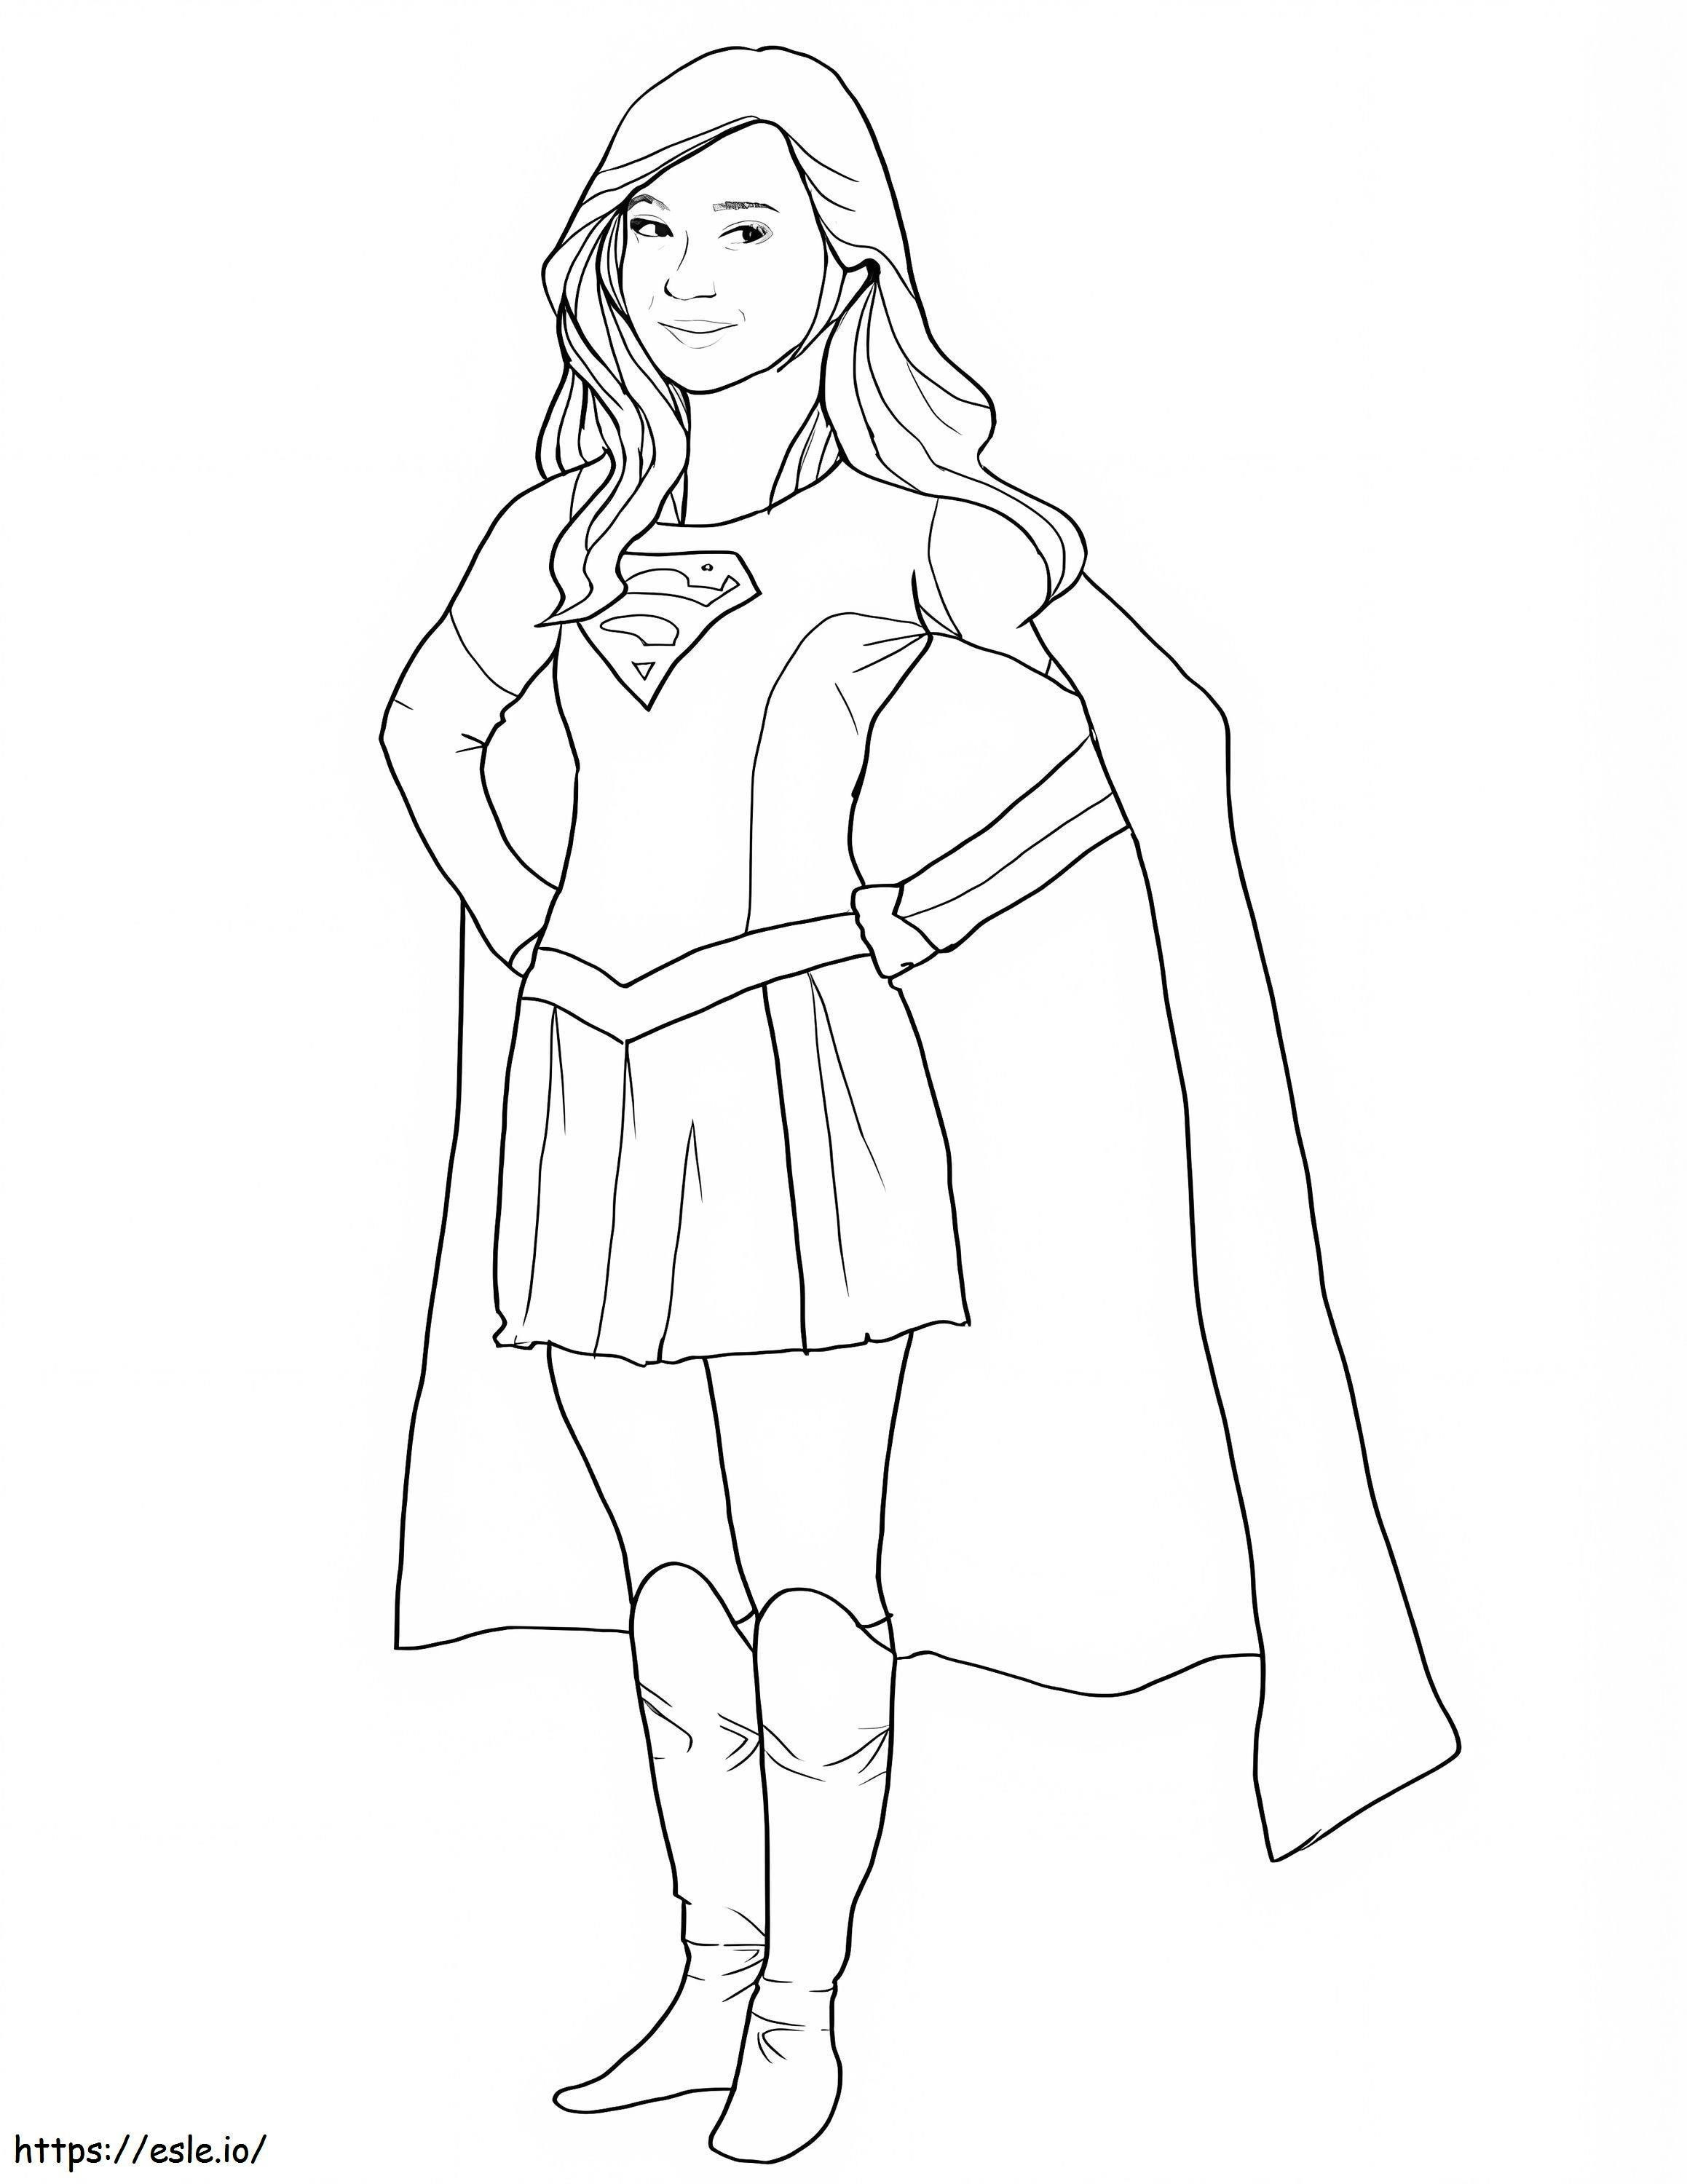 Friendly Supergirl coloring page